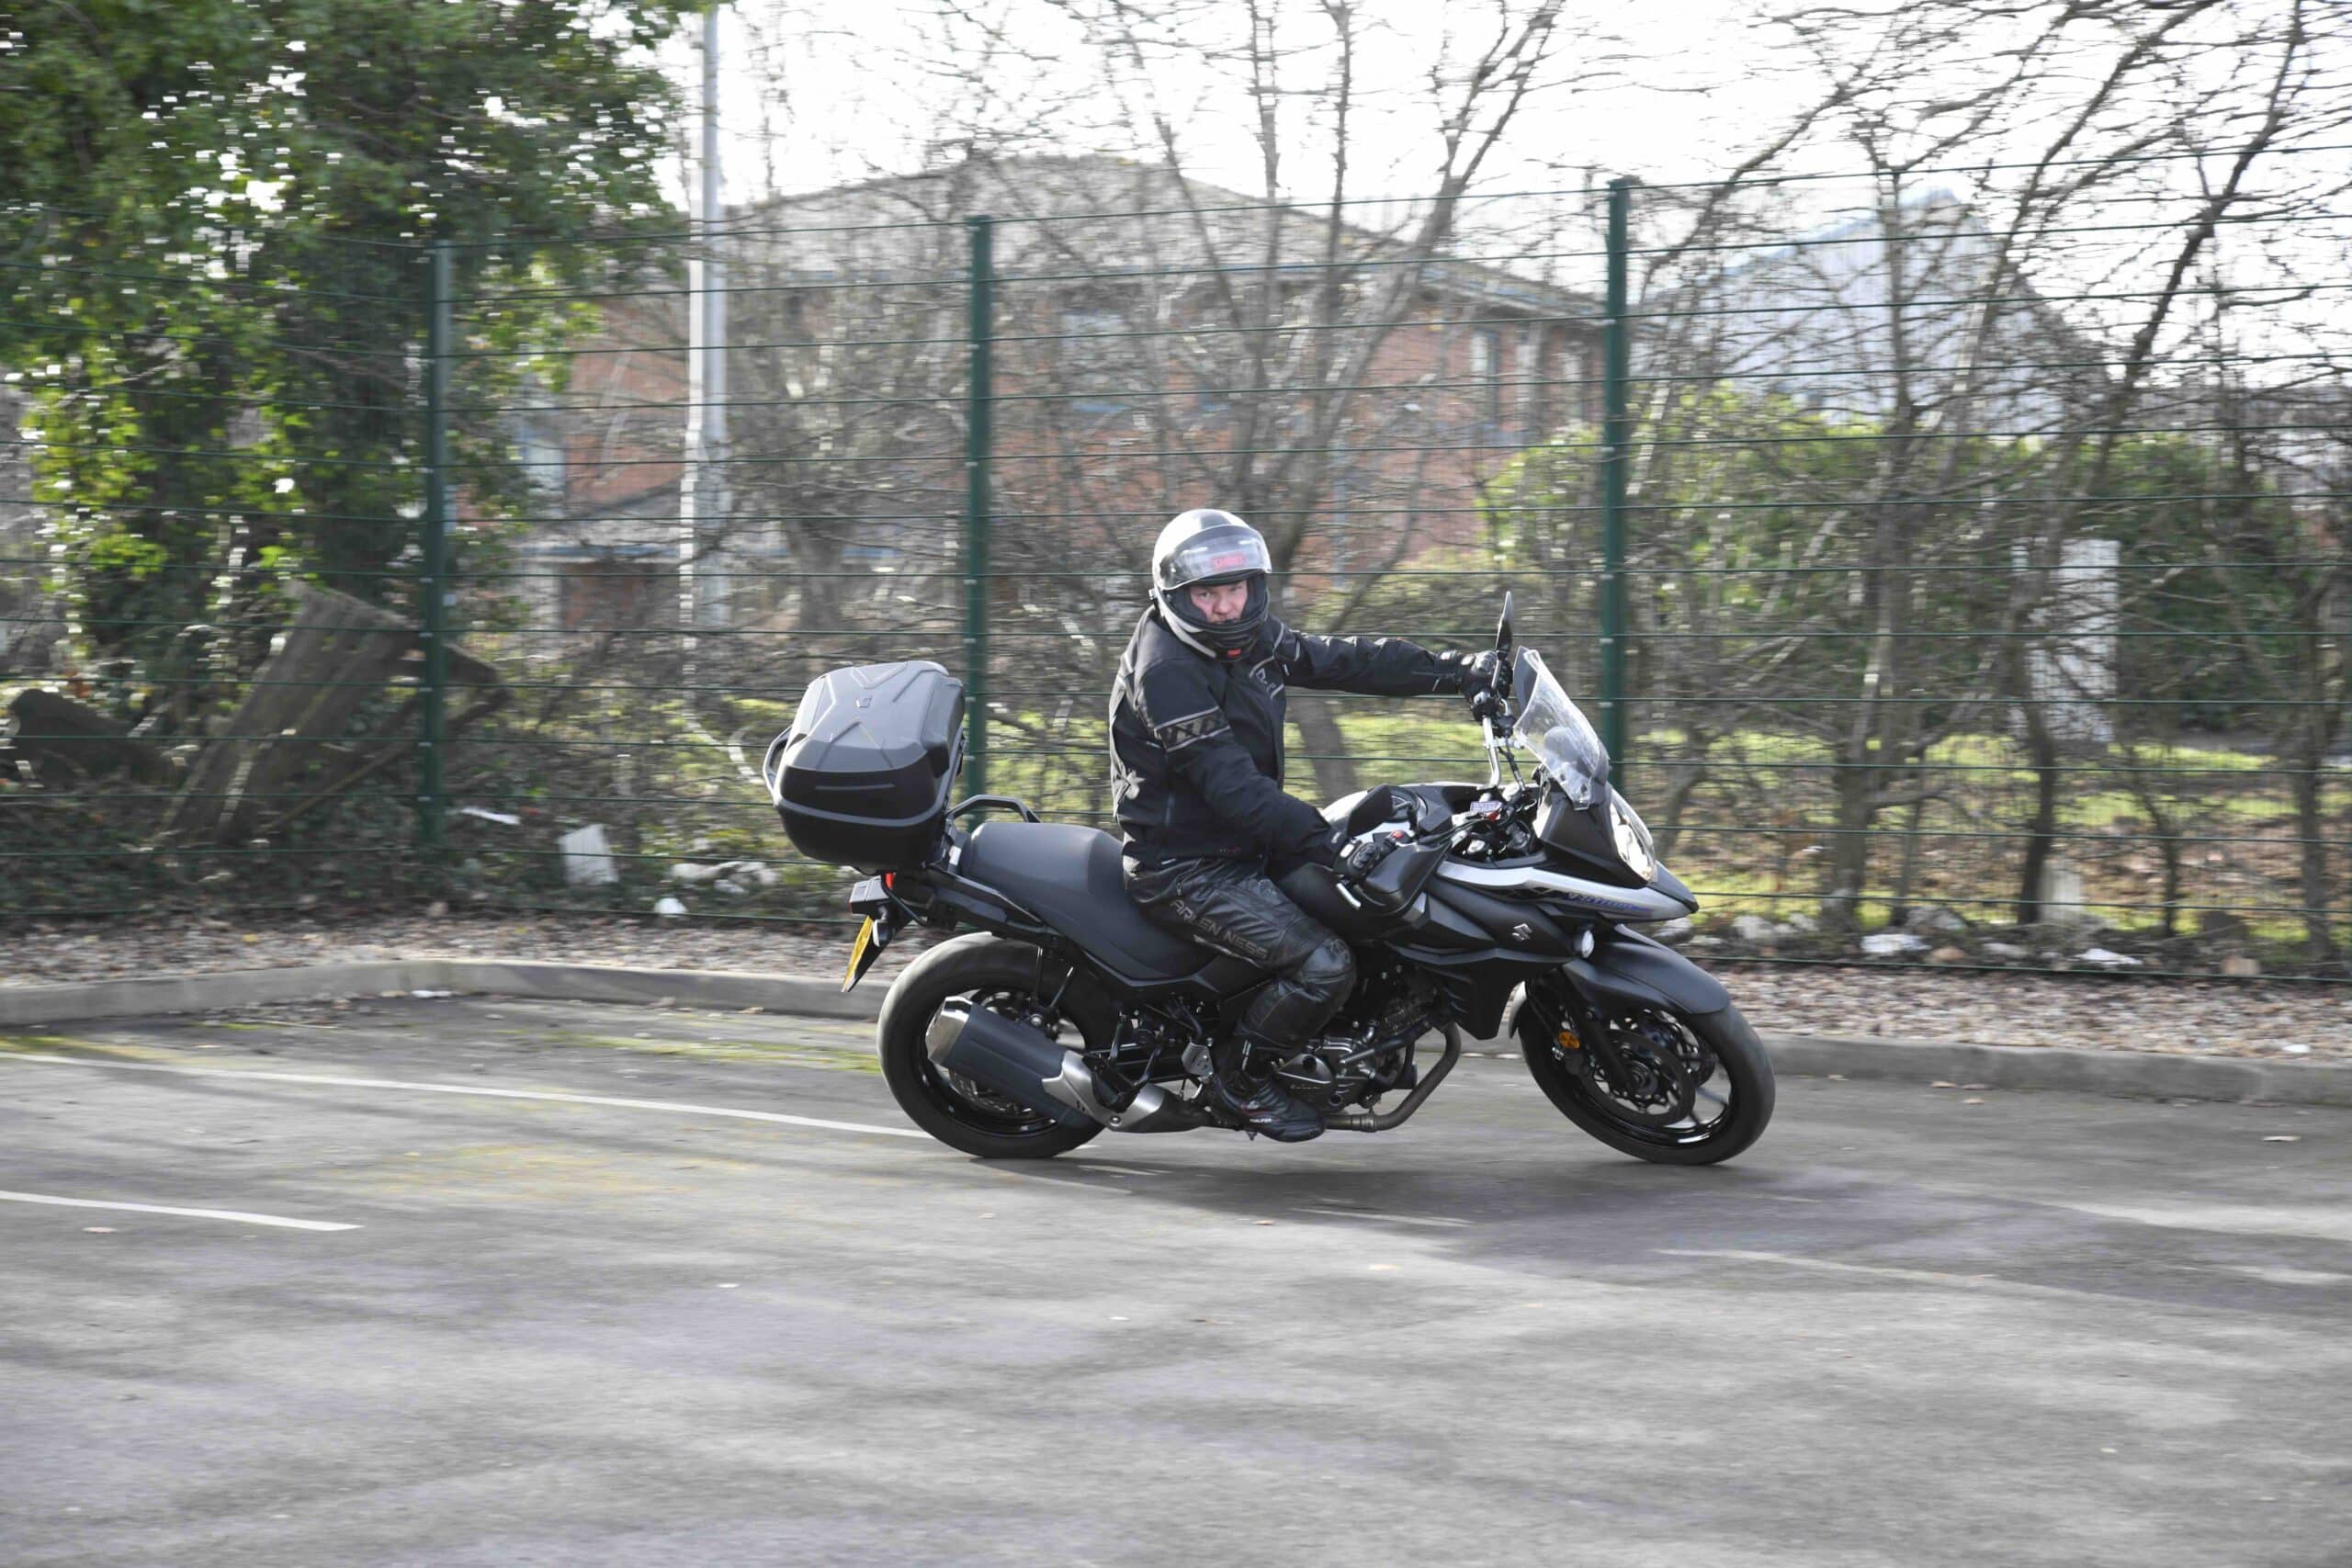 Is Motorcycle Training in the UK Good Enough?